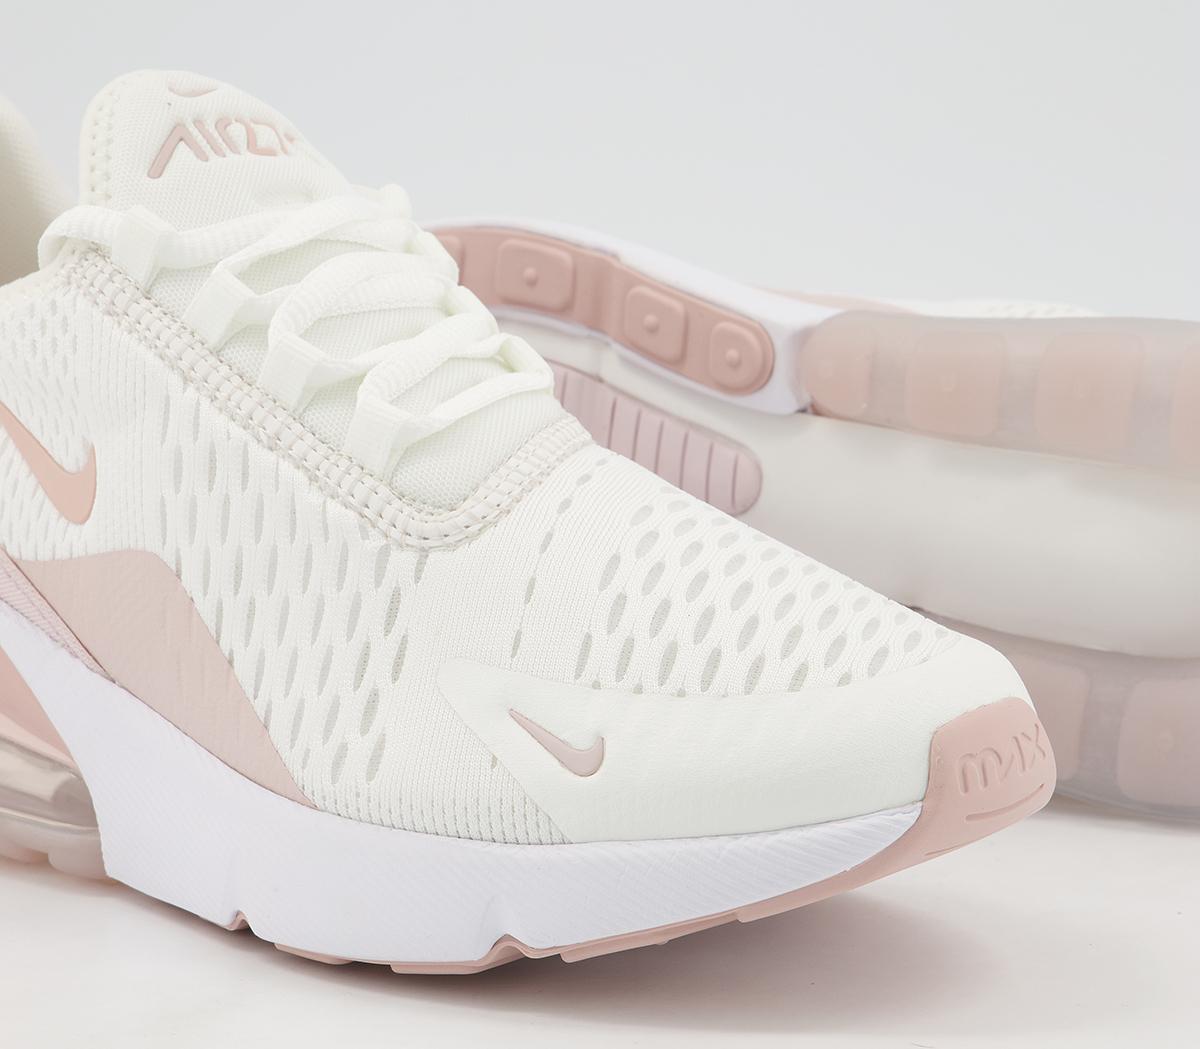 Nike Air Max 270 Trainers Summit White Pink Oxford Barely Rose - Hers